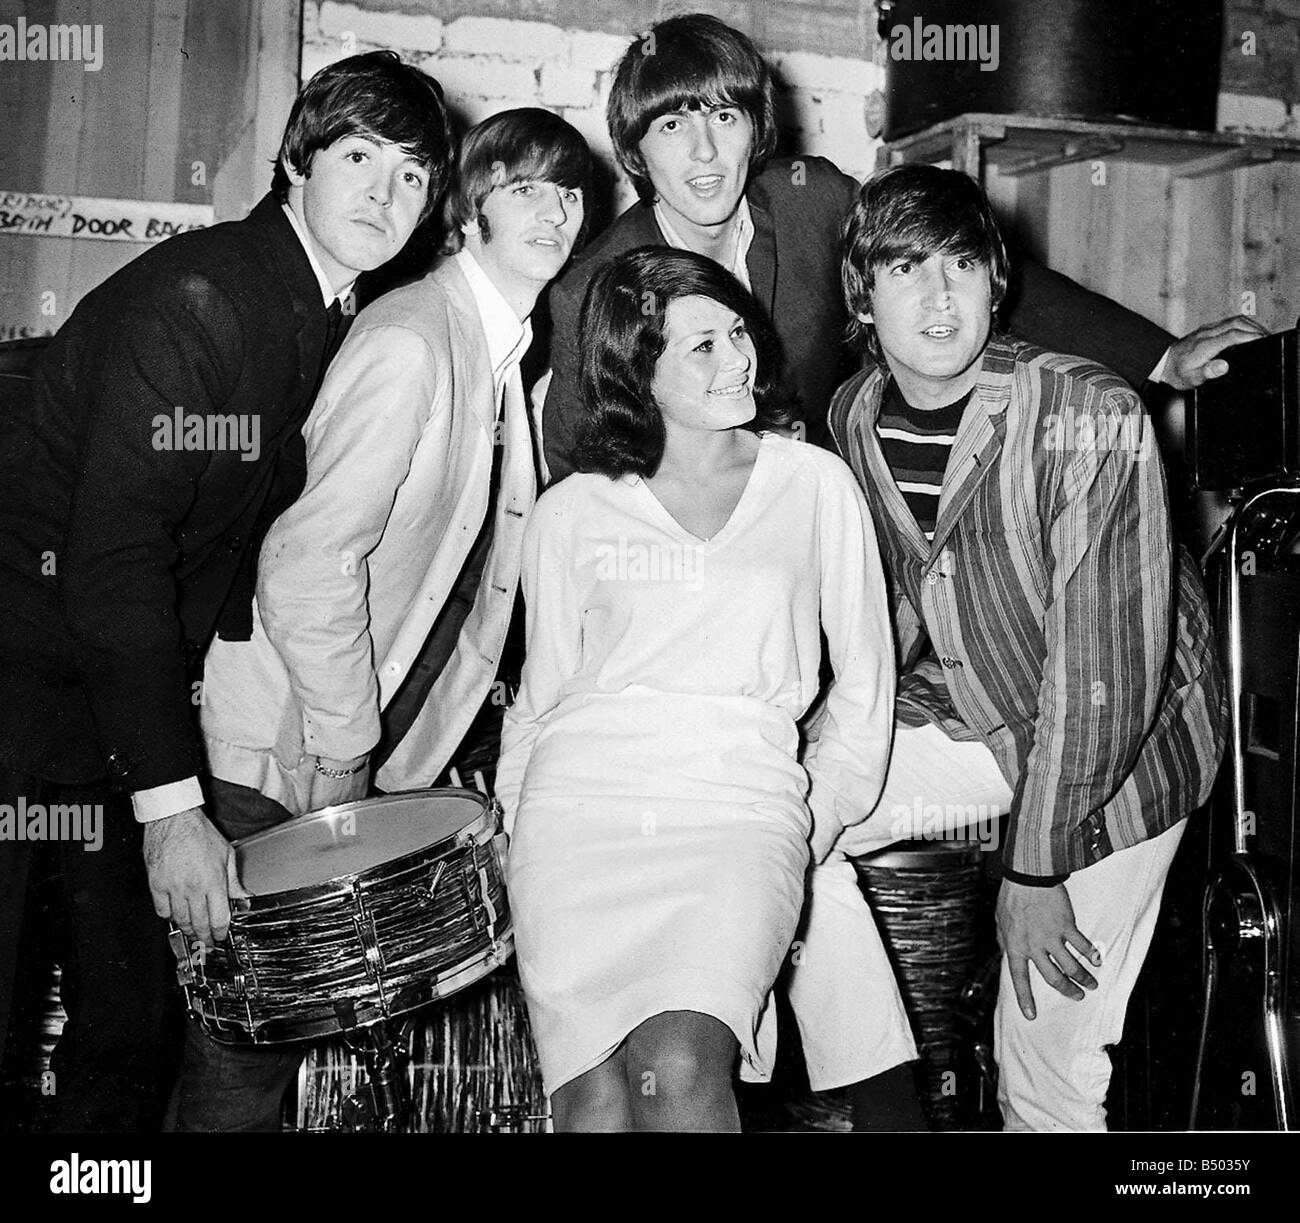 Beatles Files 1964 John Lennon Paul McCartney George Harrison and Ringo Starr with support singer Cherry Rowland July 1964 Stock Photo